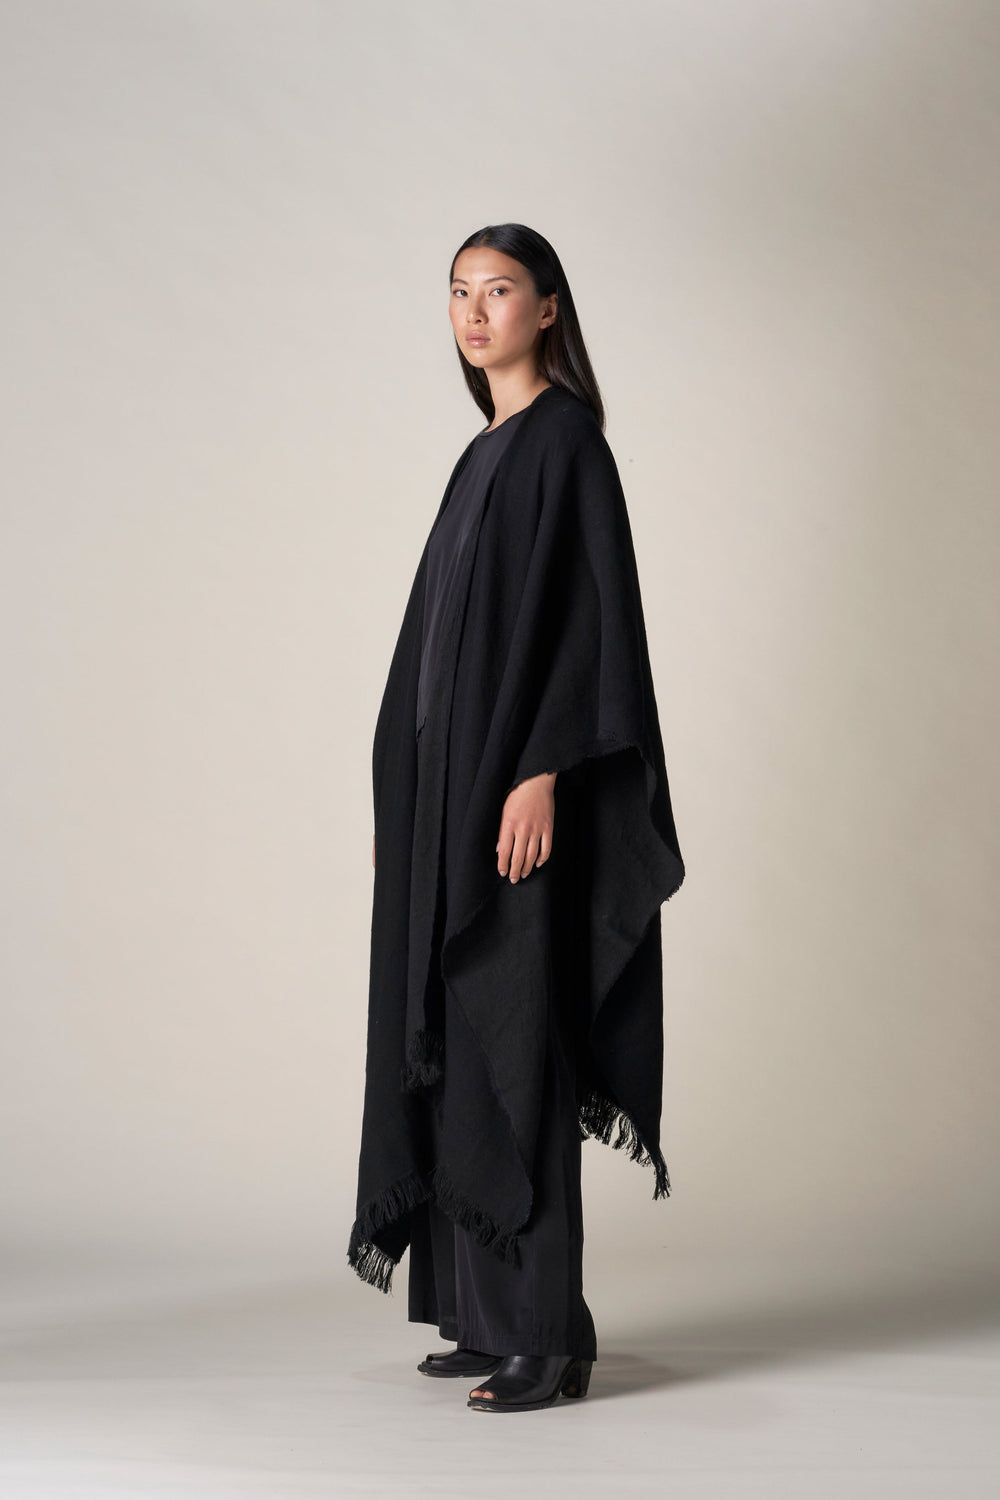 Long Wearable Blanket Cashmere and Hemp Black